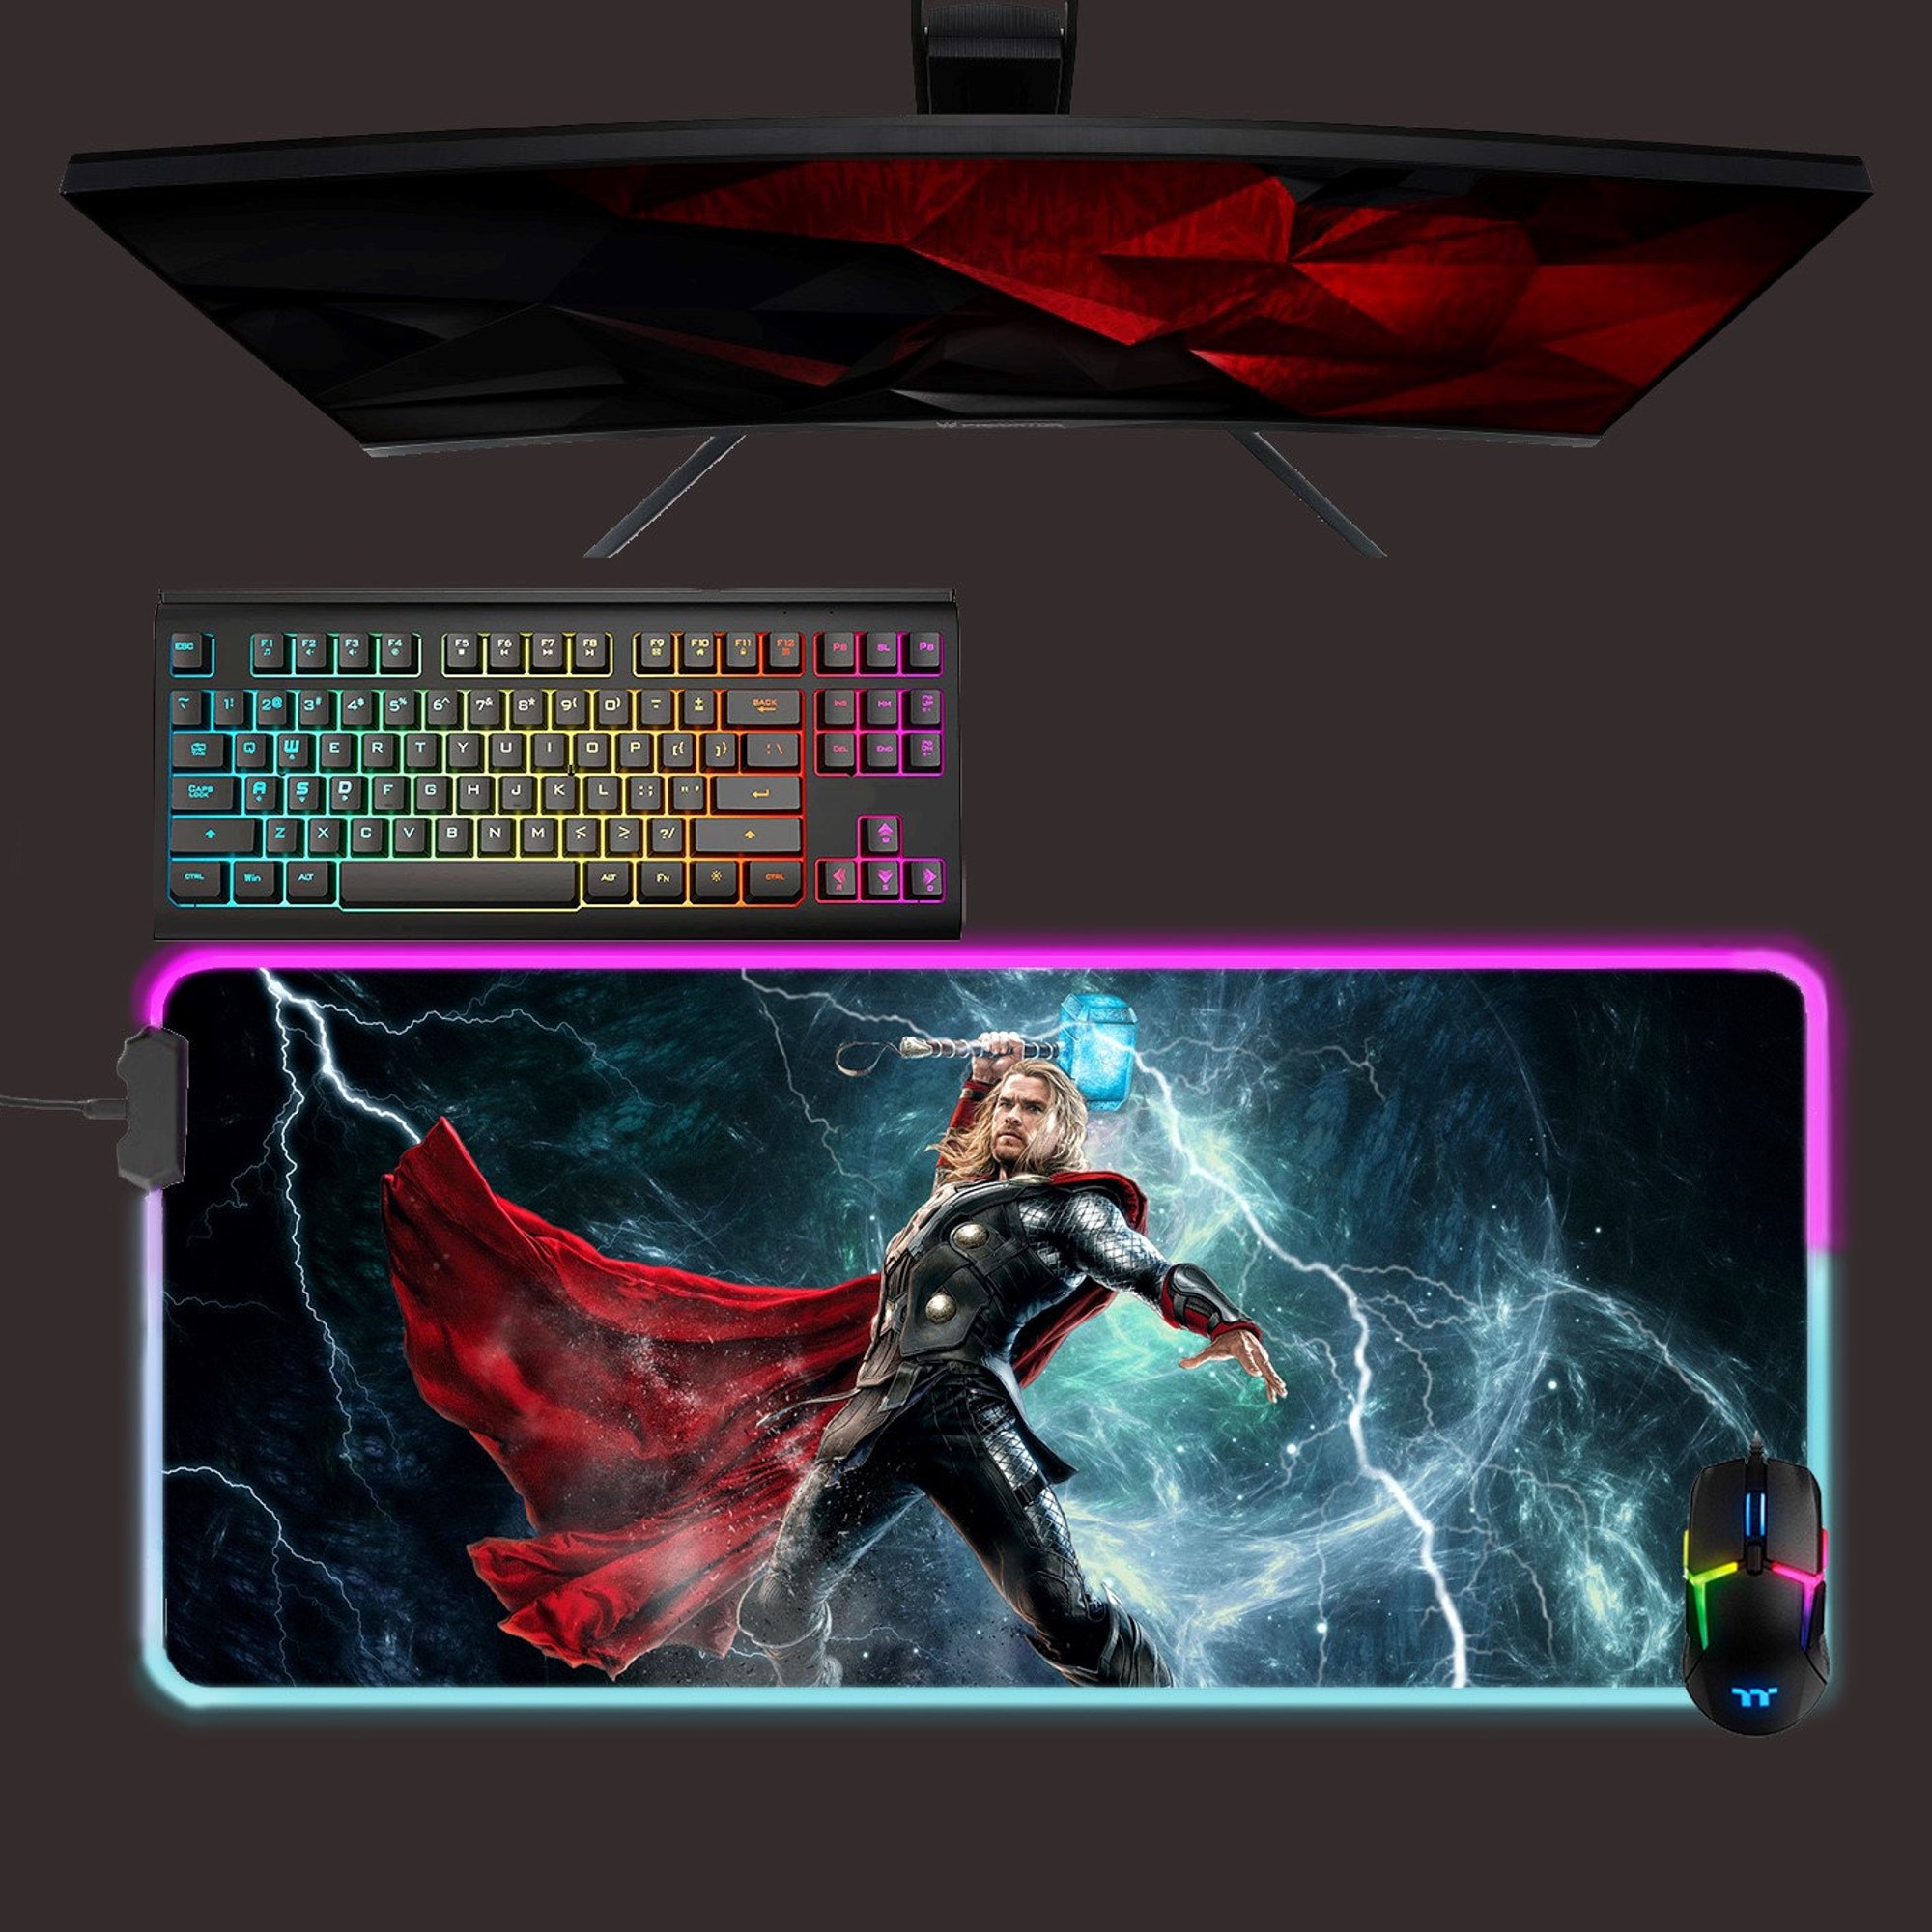 Thor led mouse mat, Avengers rgb mouse pad, gaming mouse pad